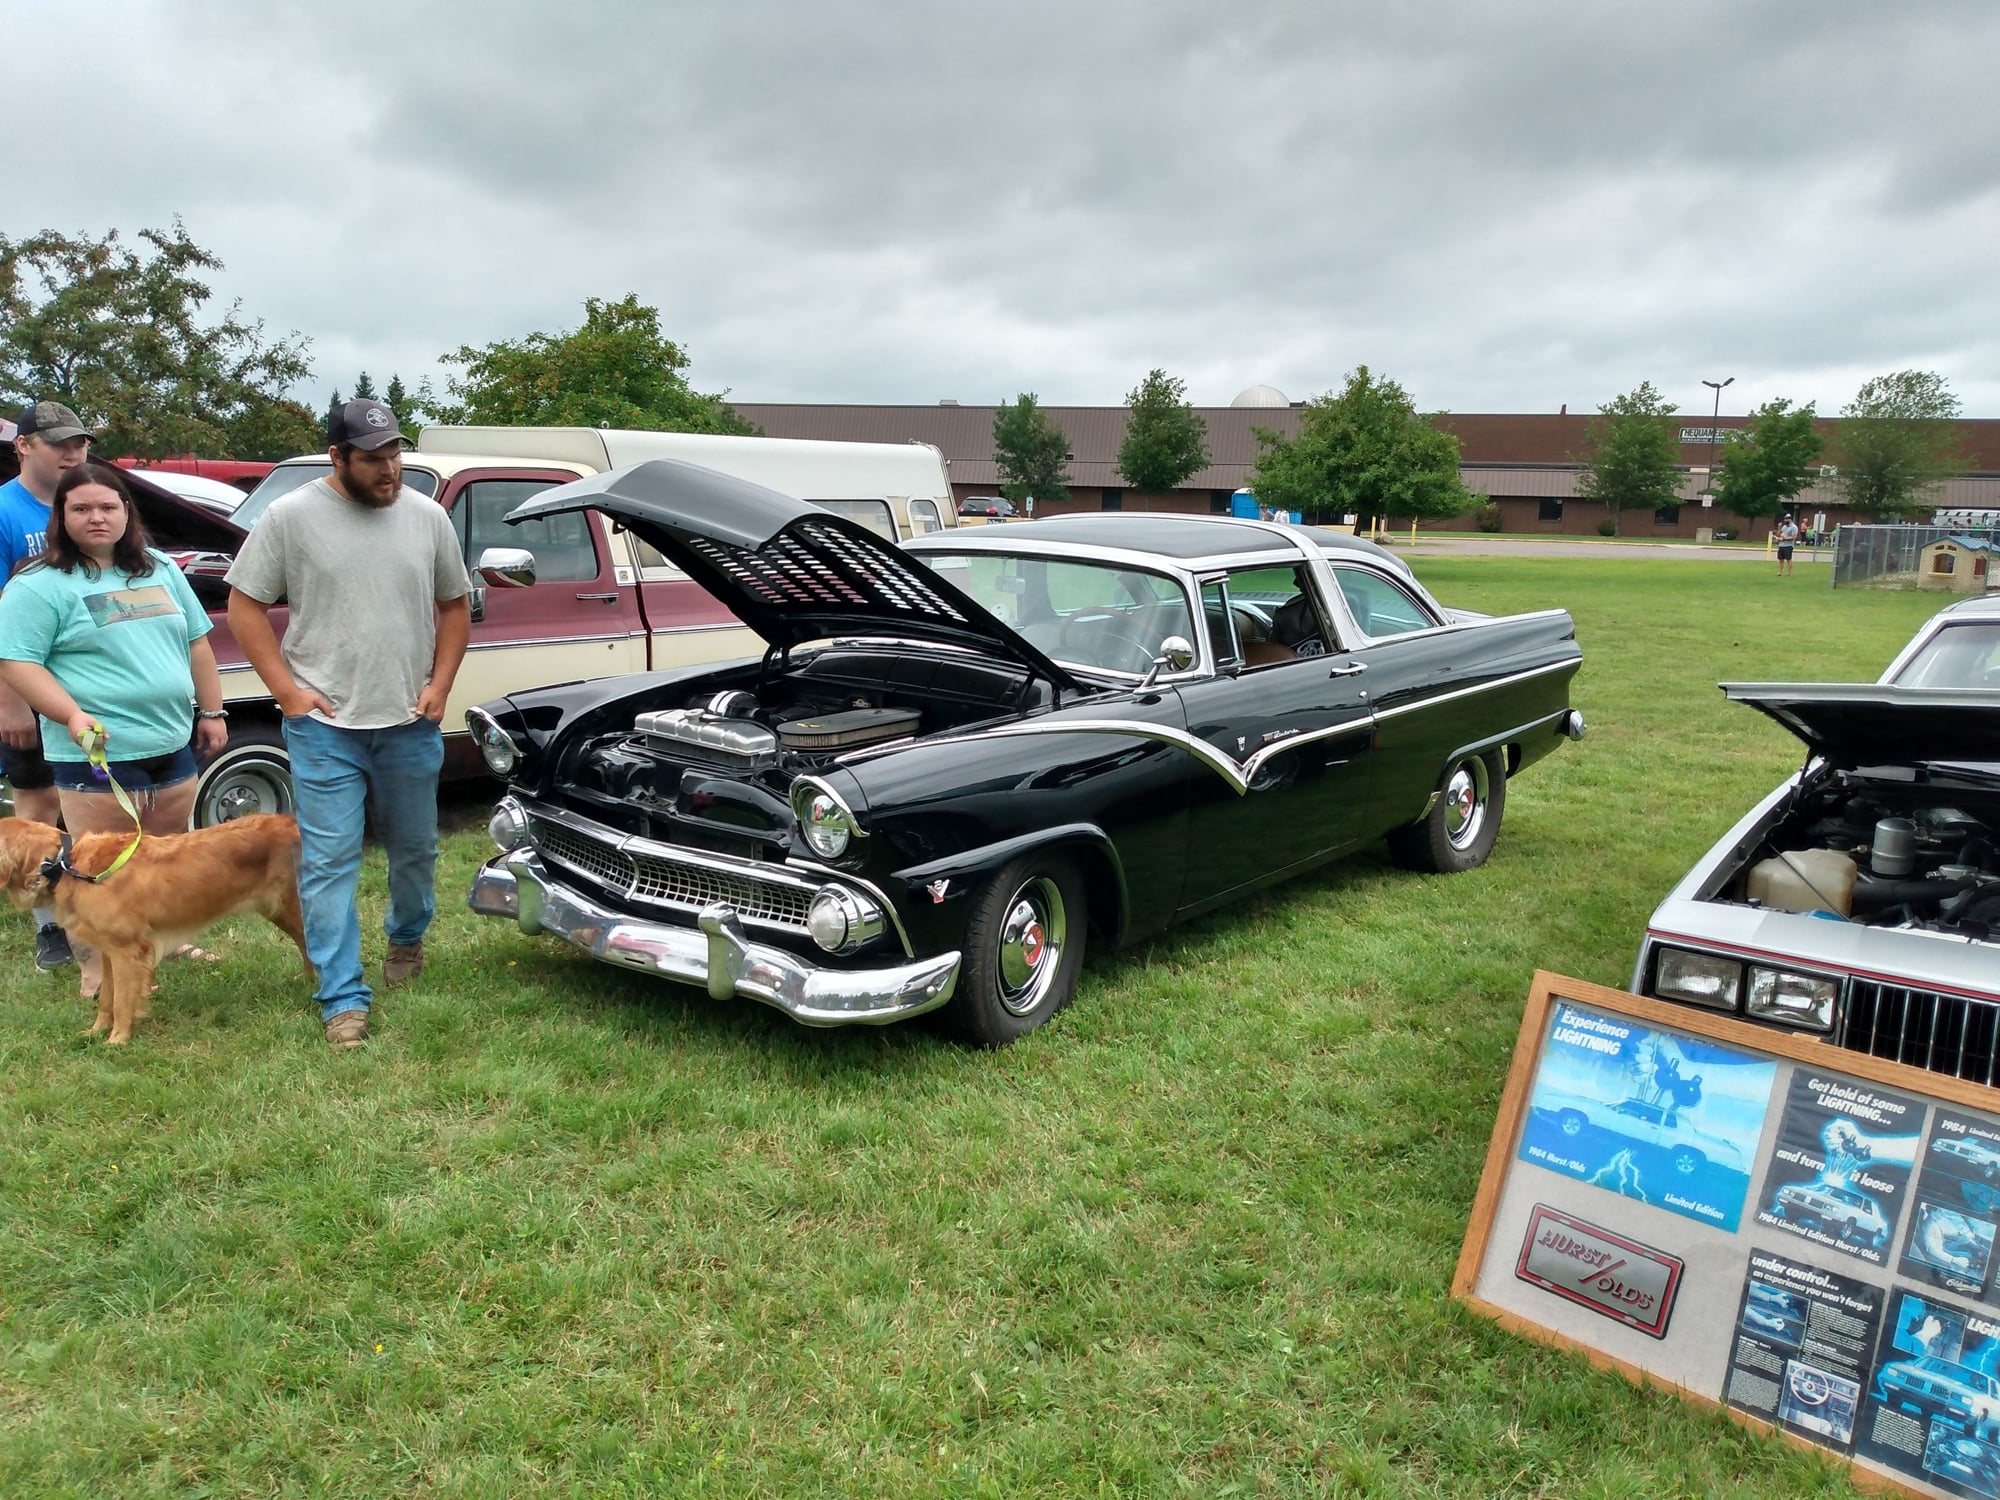 Pics From Car Show Today in Northern Wisconsin